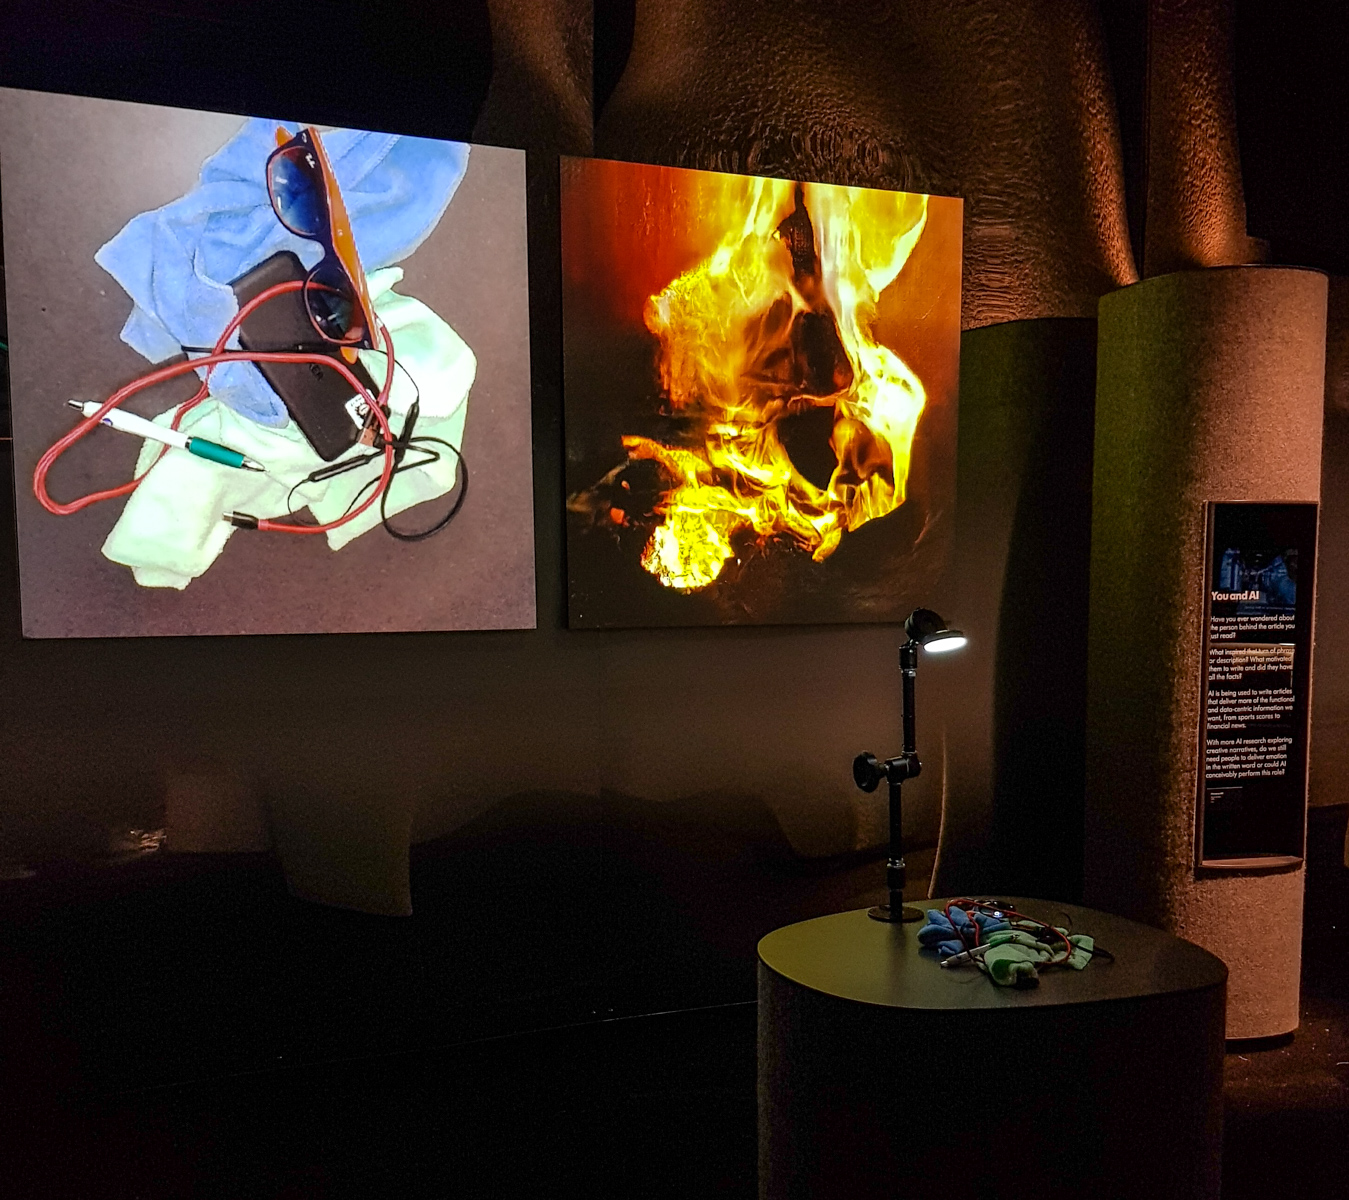 Learning to See, Installation view at "AI: More than Human", The Barbican, London, UK, 2019\label{fig1}